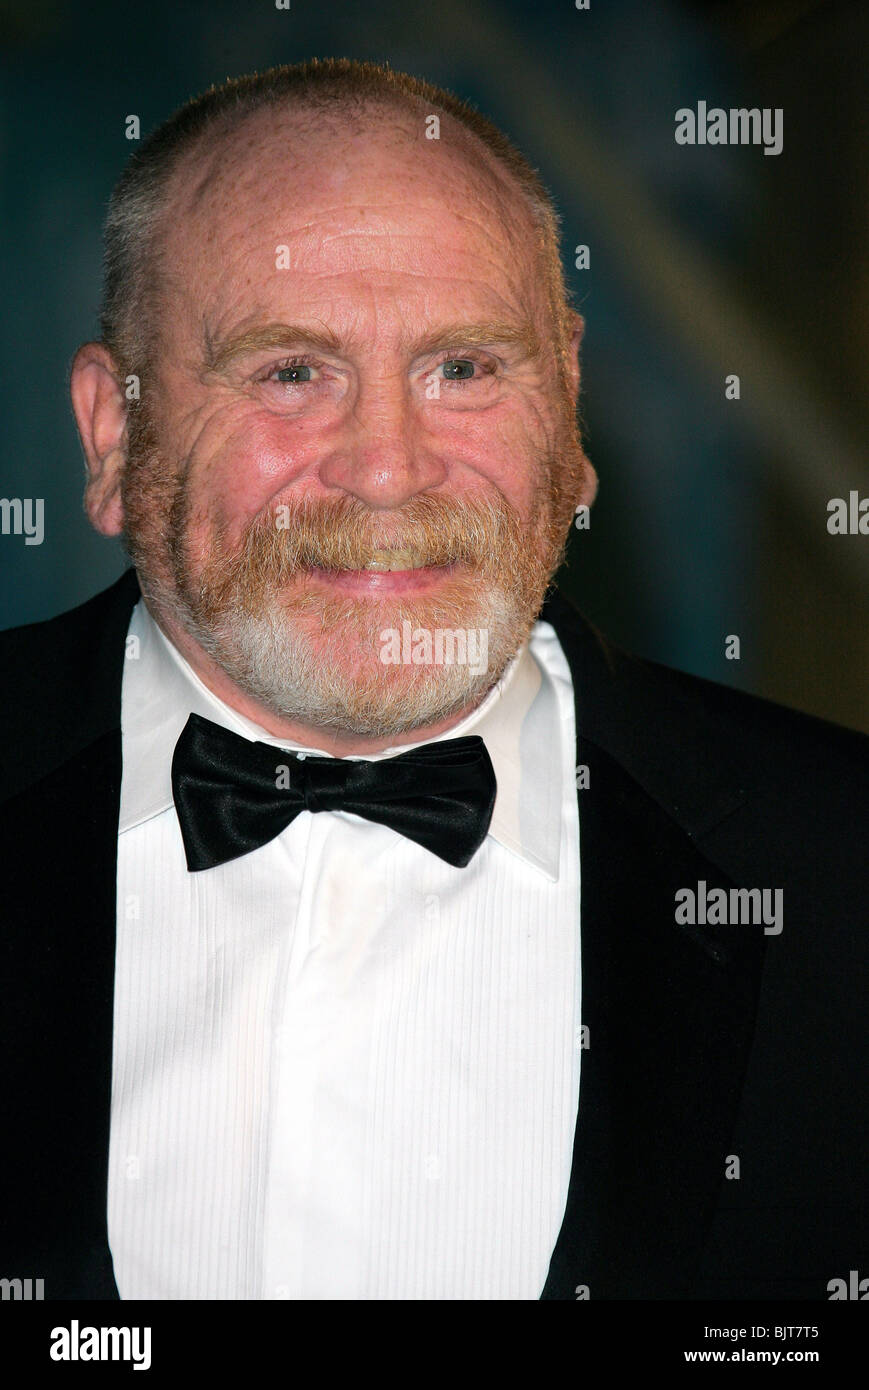 JAMES COSMO THE CHRONICLES OF NARNIA FILM PREMIER THE ROYAL ALBERT HALL LONDON ENGLAND 07 December 2005 Stock Photo